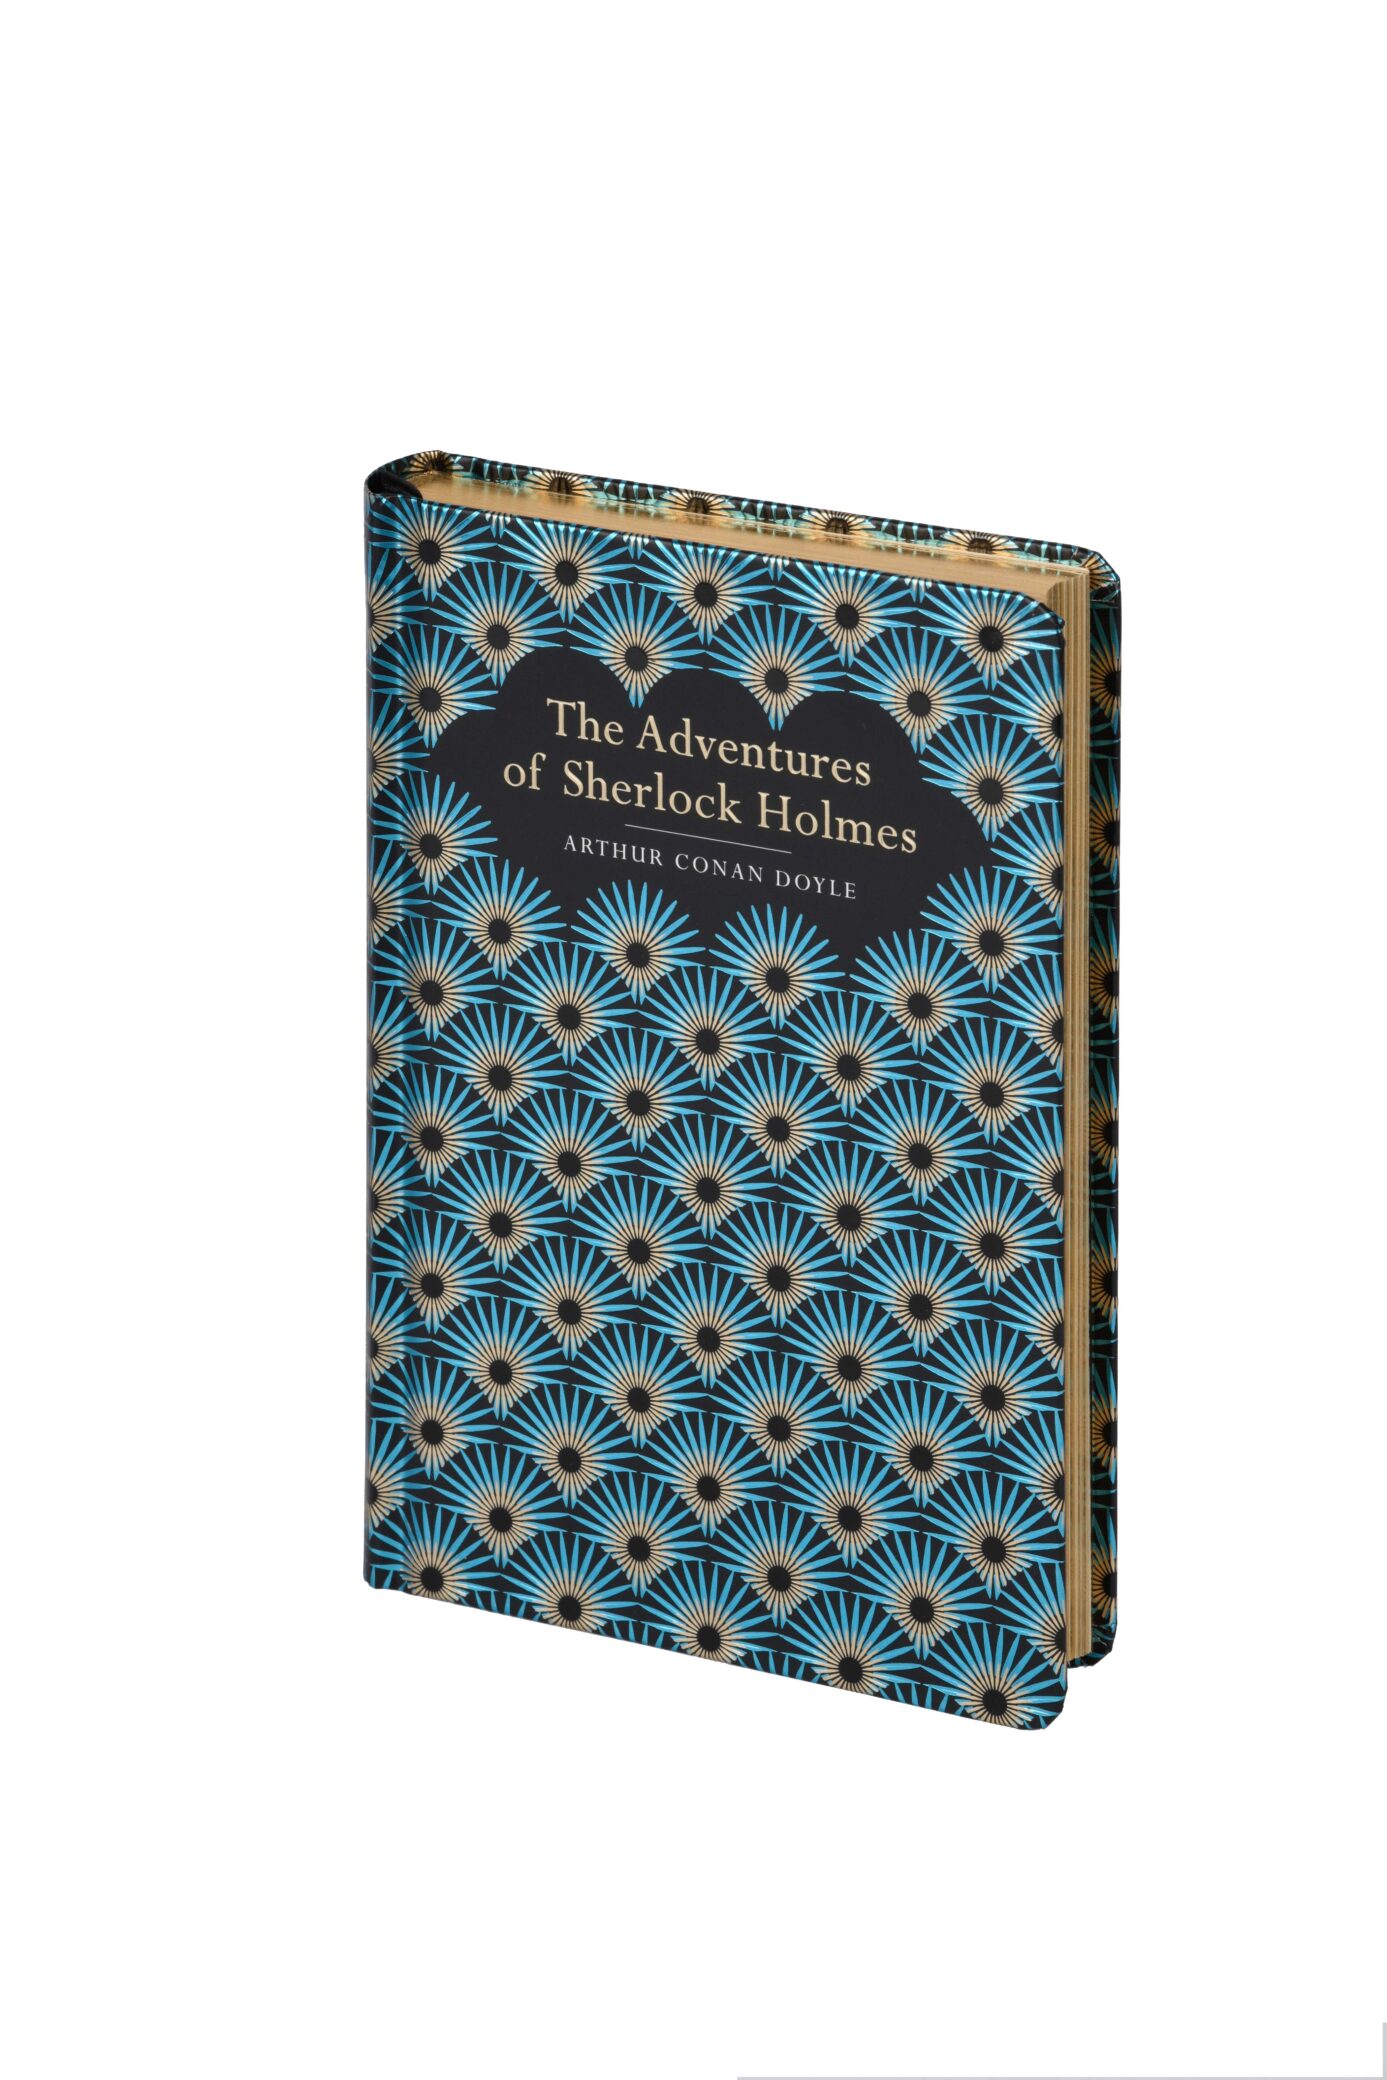 of　Chiltern　Sherlock　Publishing　Holmes　Limited　The　Adventures